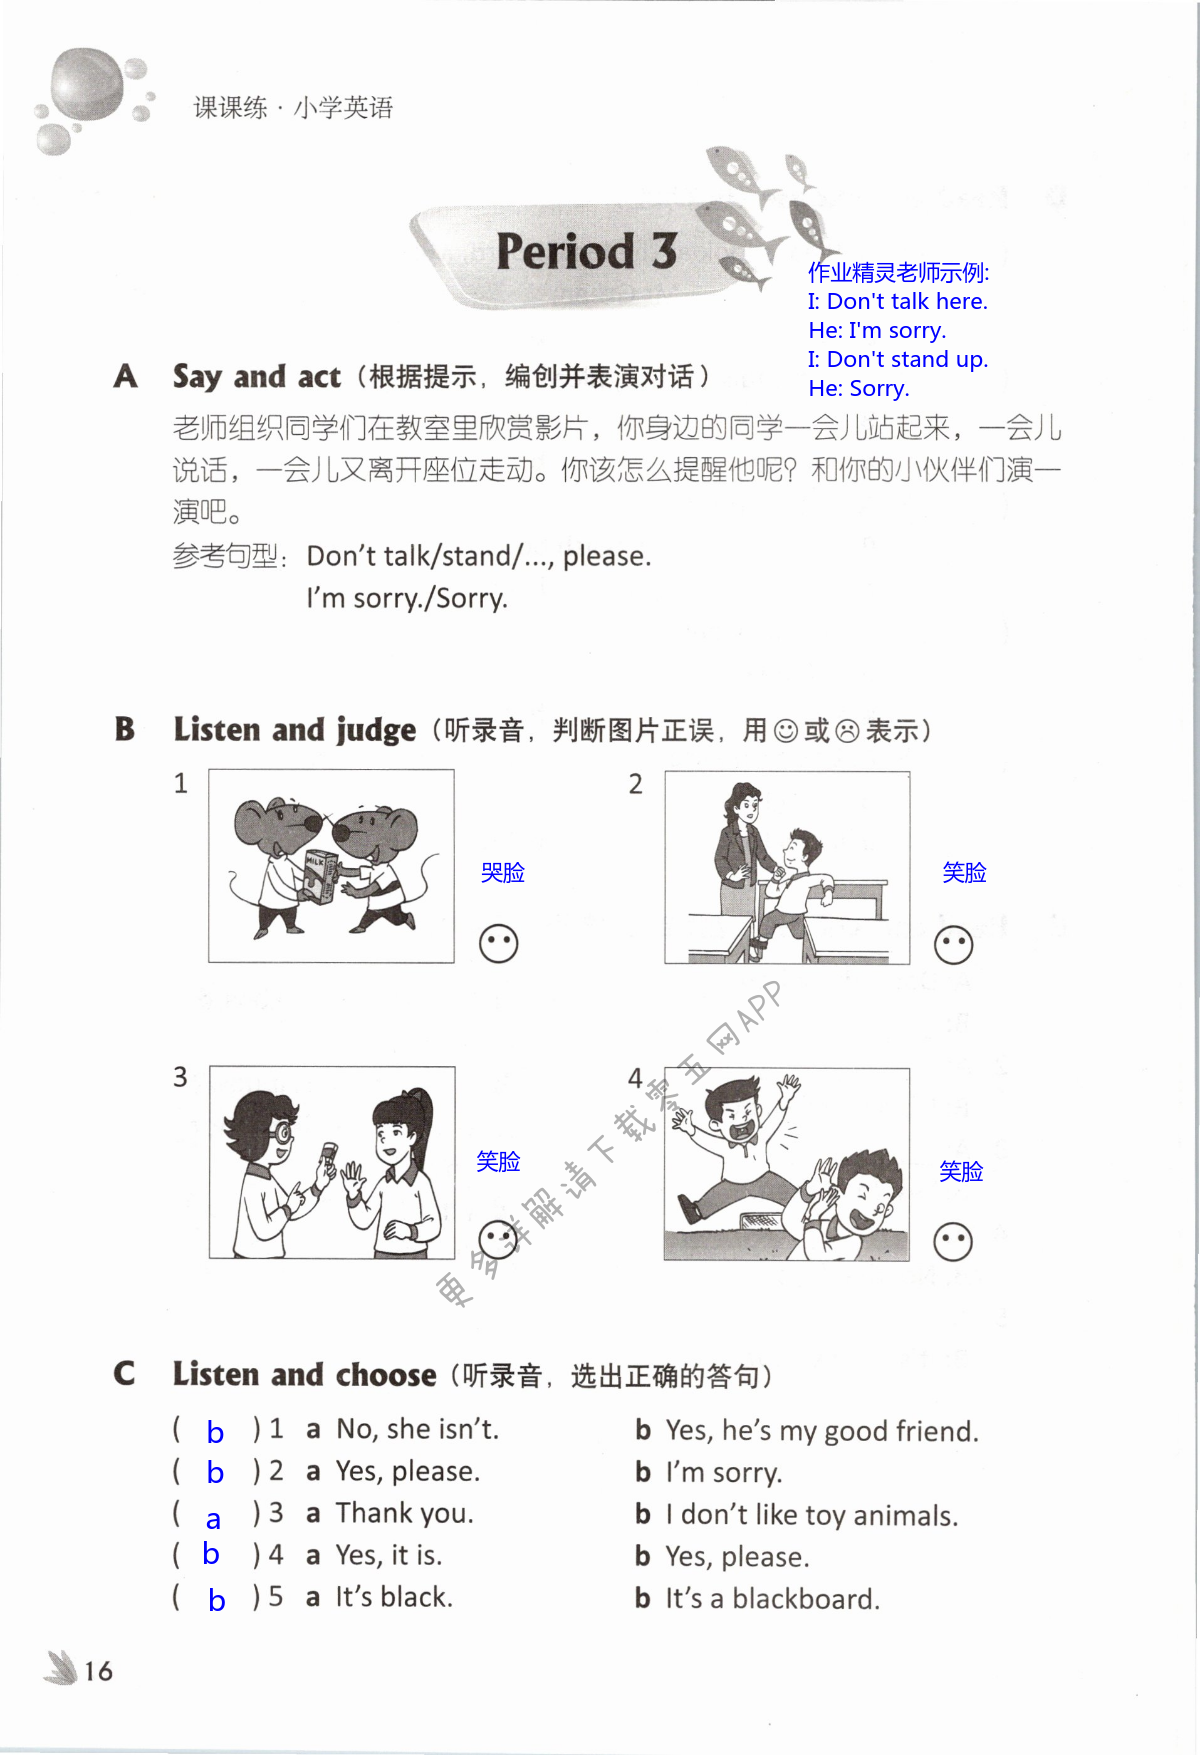 Unit 2 In the library - 第16页